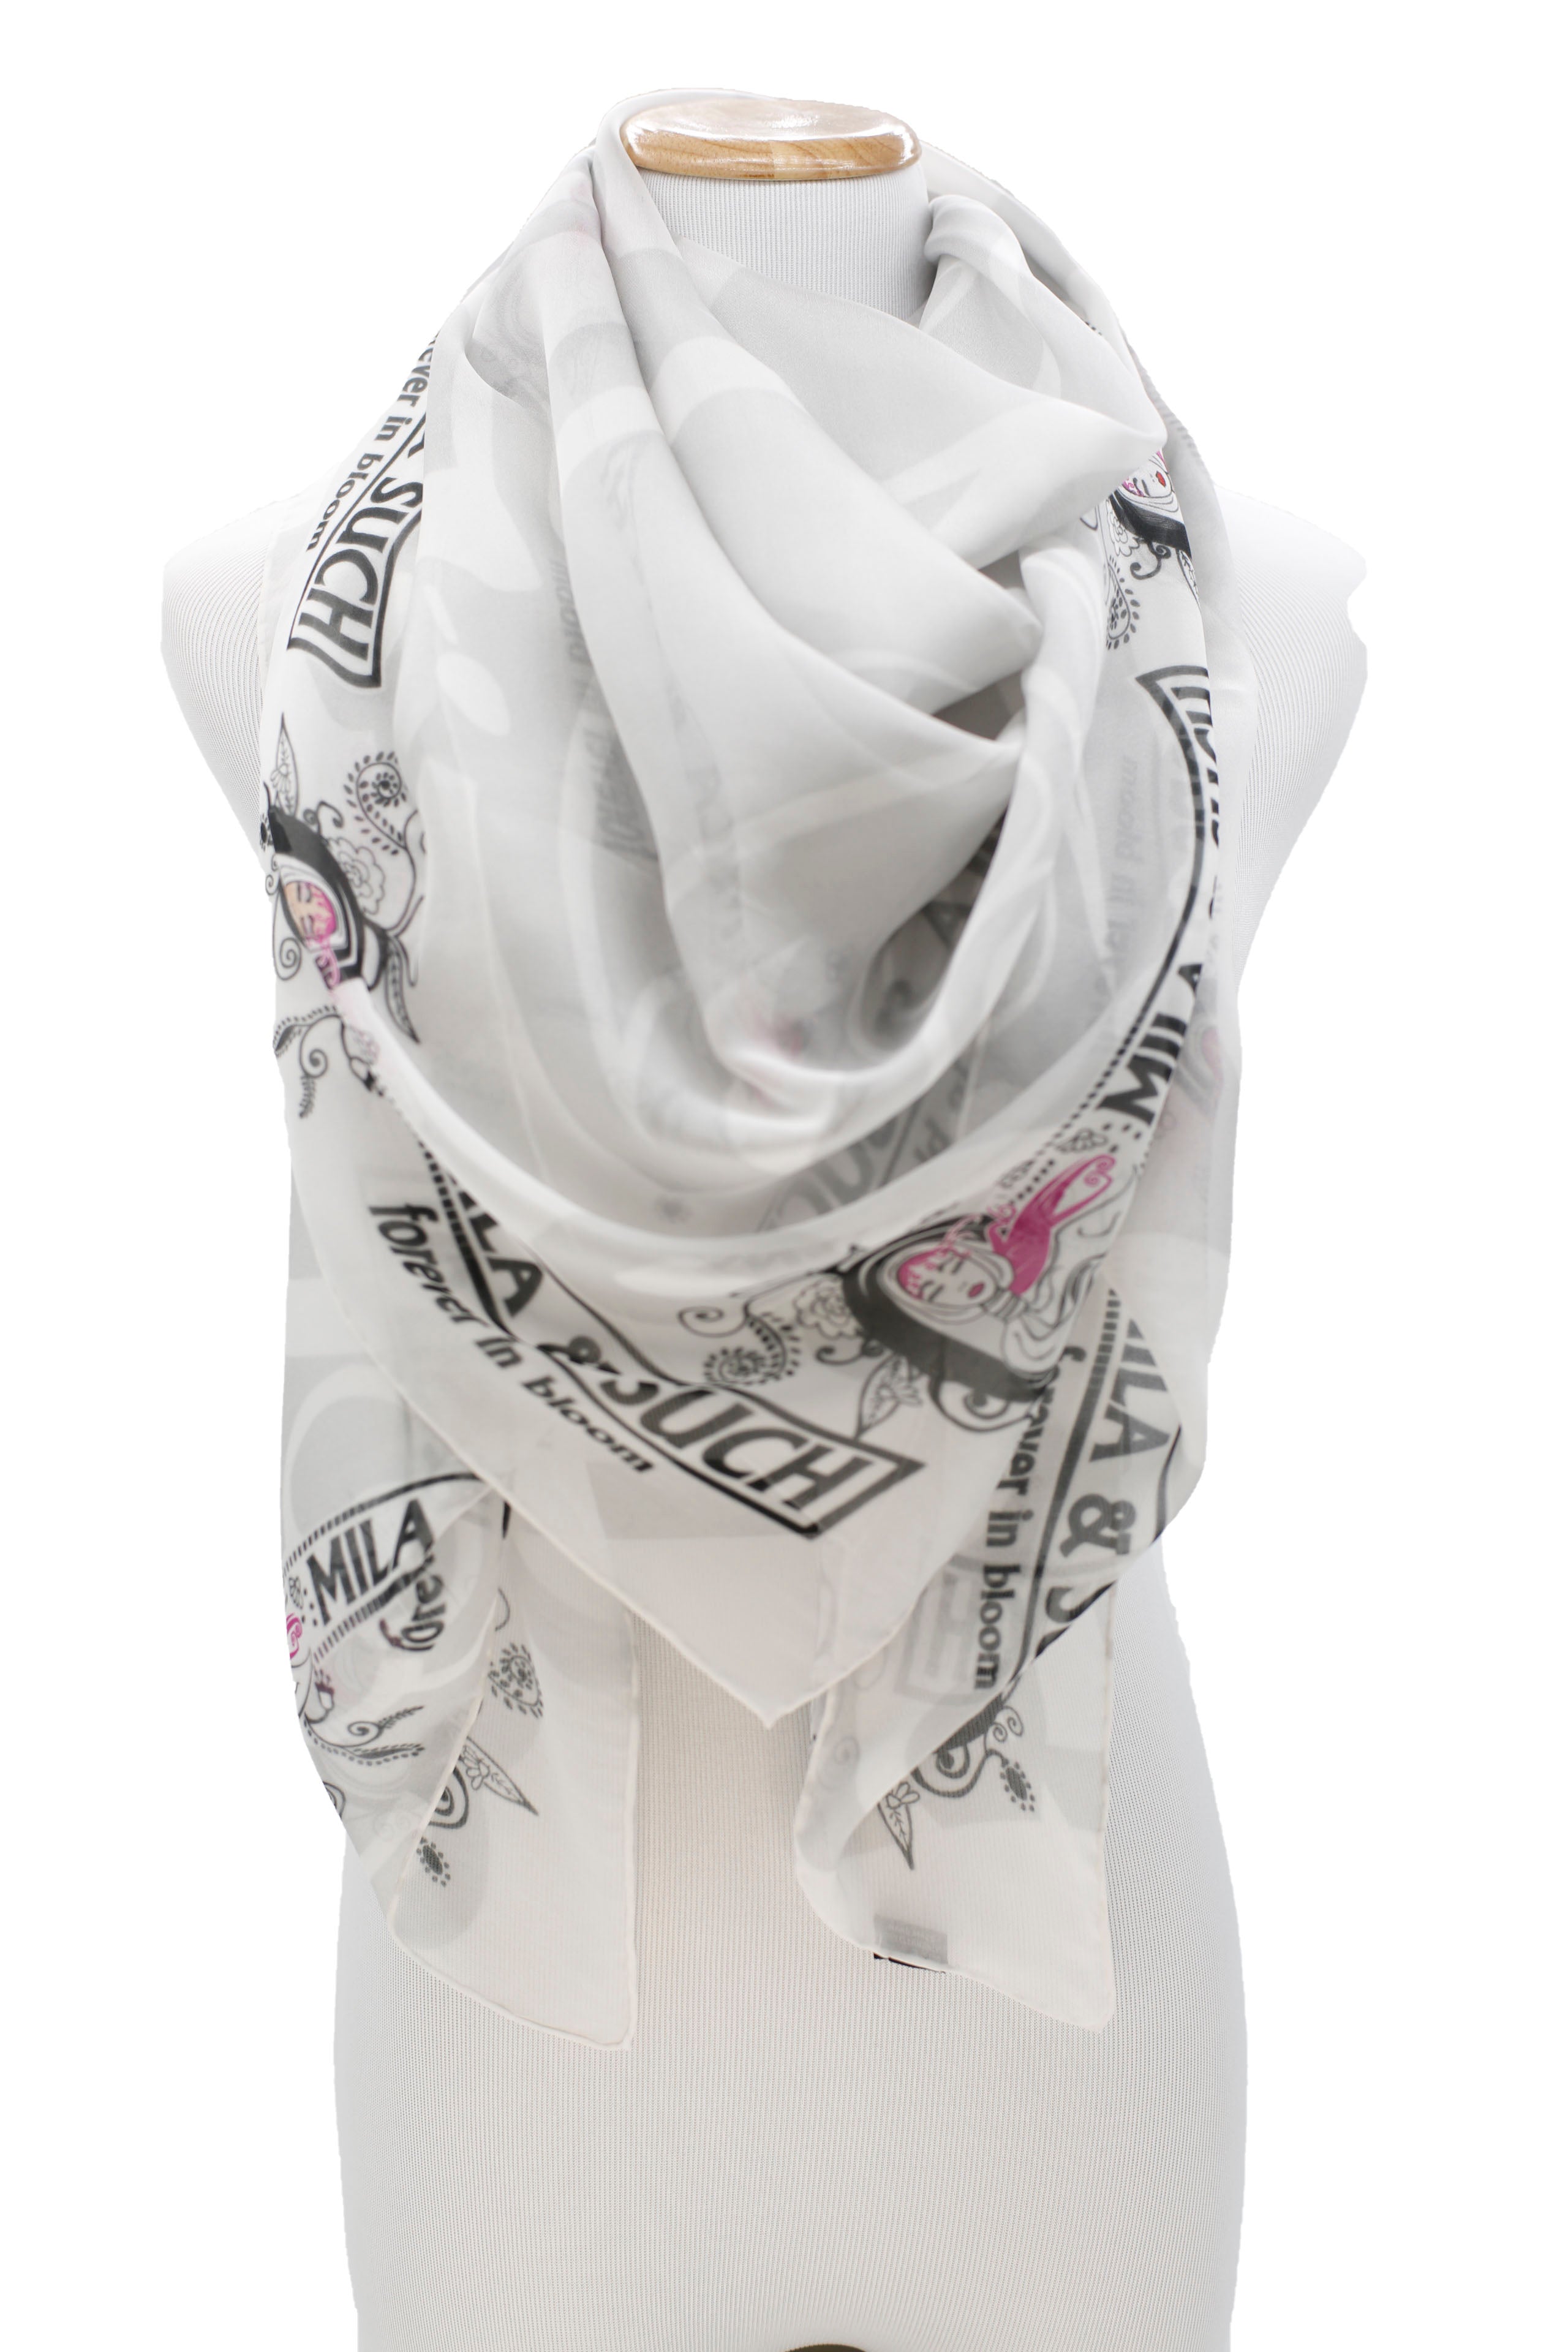 Designer Square Silk Scarf for Women Hand Painted and Printed Grey Shawl  with Pink Rose Unique by EdGalArt